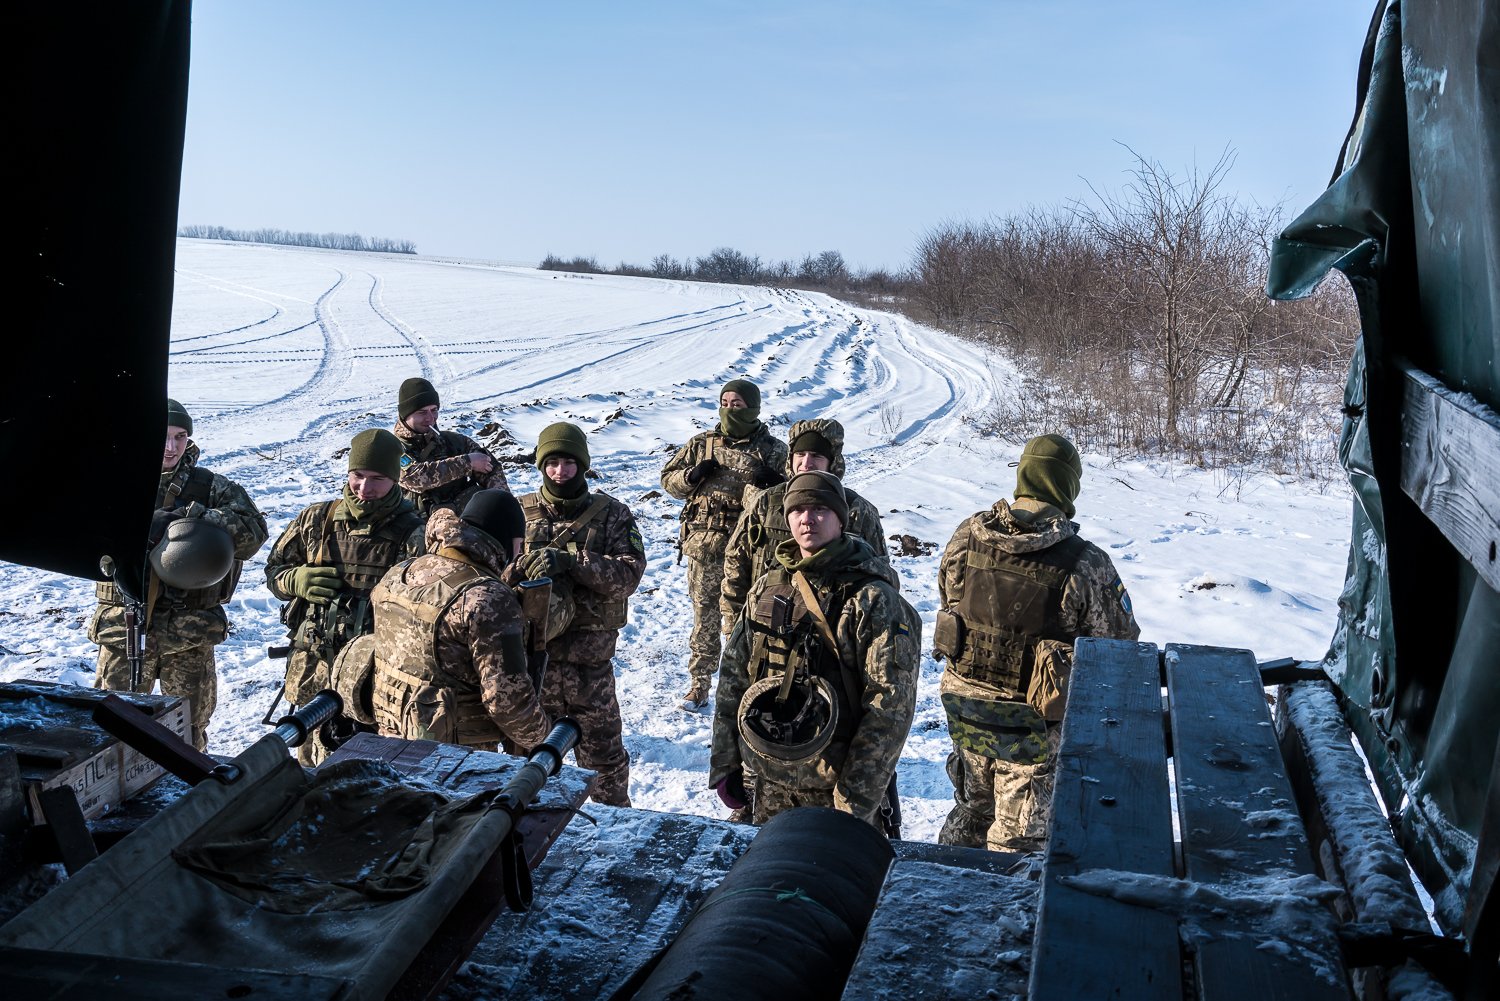  Artillerists from the Ukrainian Army's 53rd Mechanized Brigade train with small arms at a military training site on Thursday, January 27, 2022 in Volnovakha district, Ukraine. 